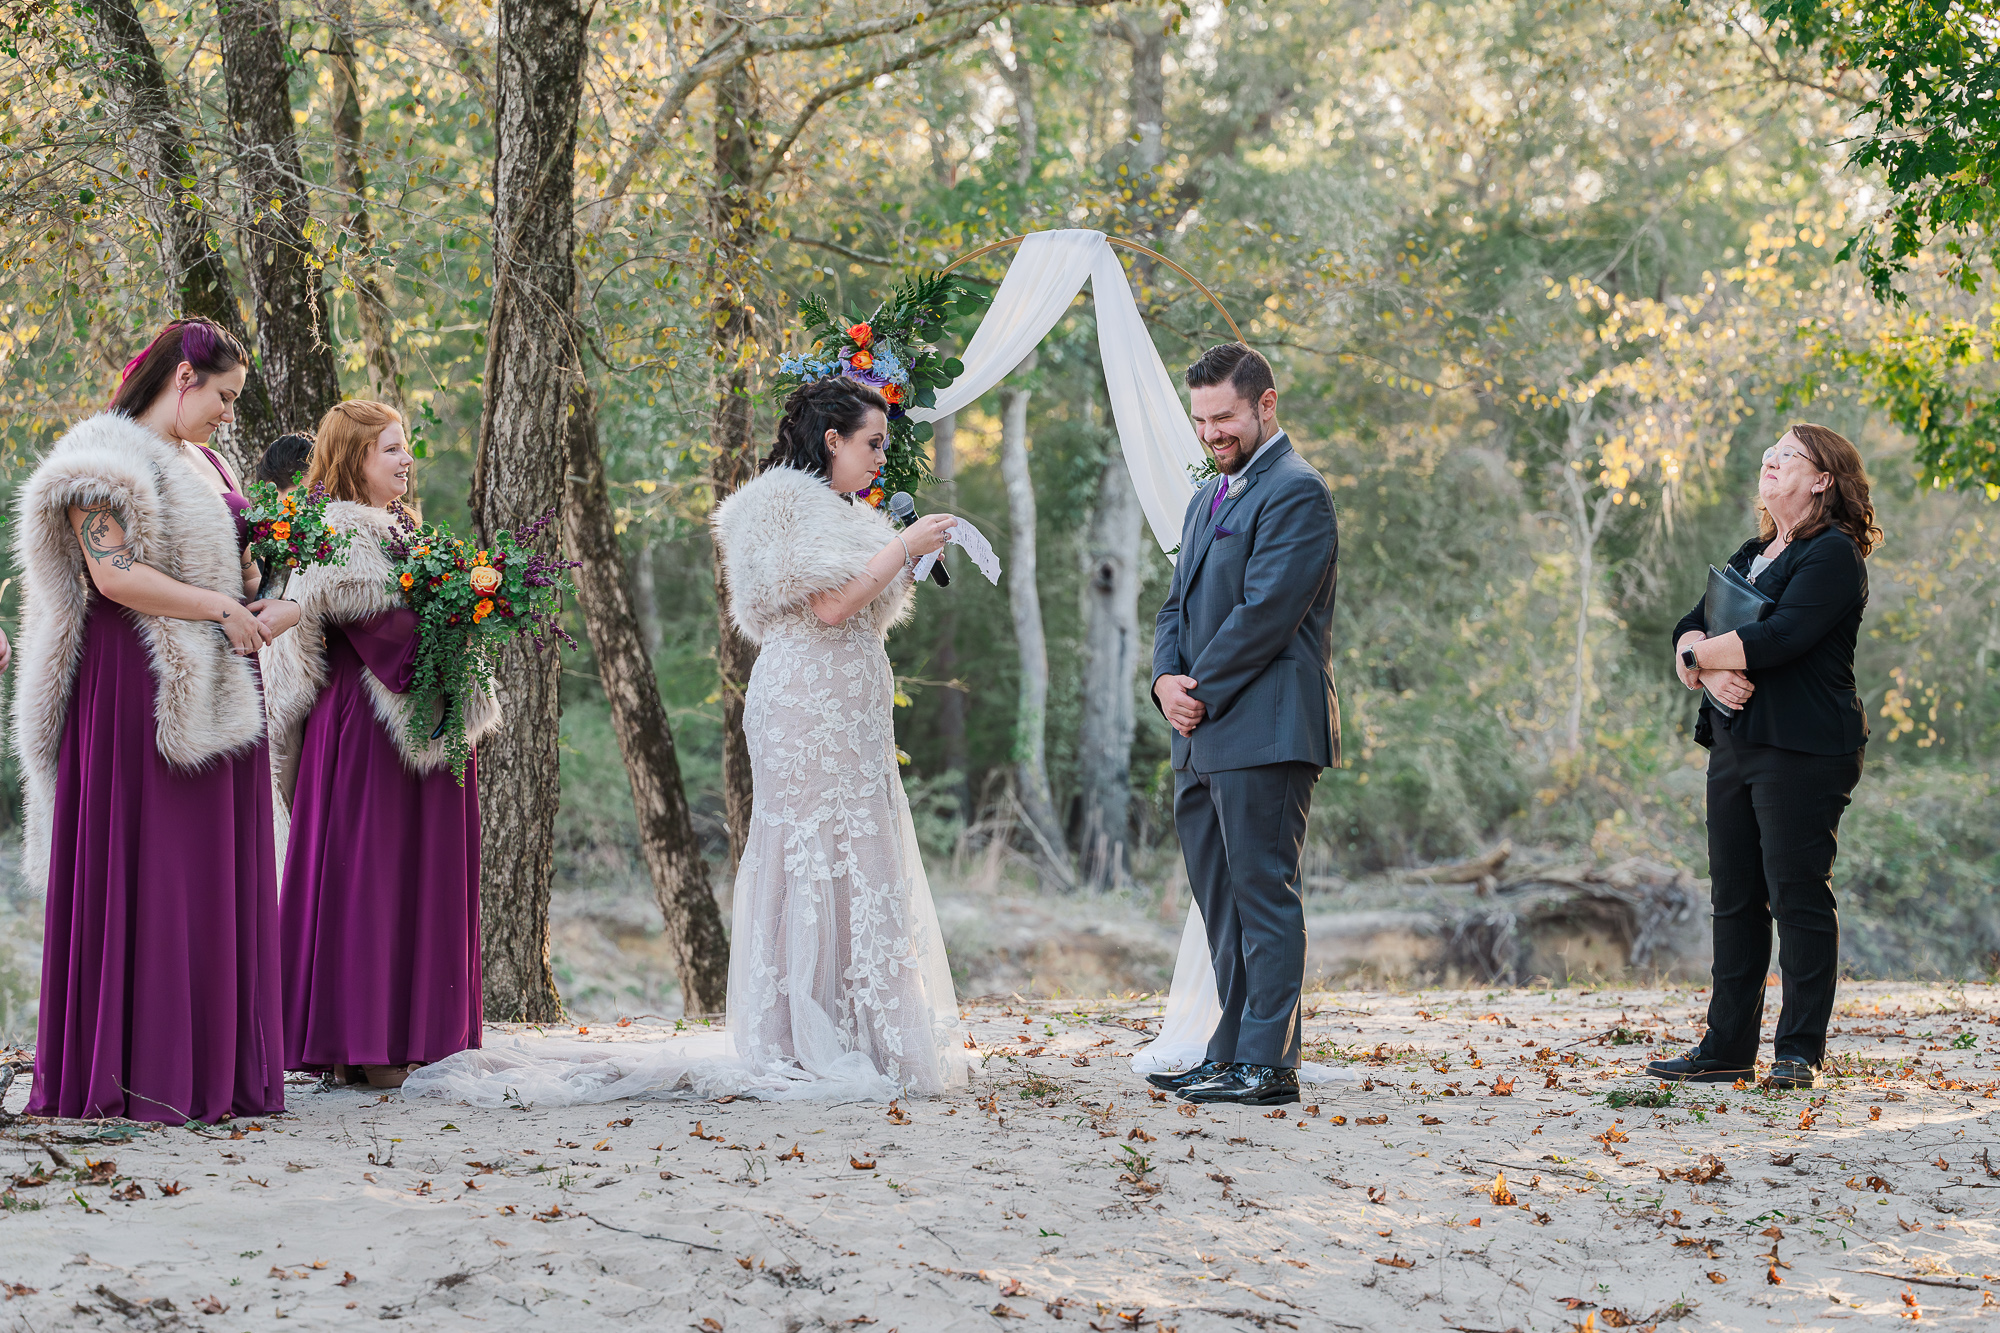 A couple exchanging their vows at The River Landing Wedding Venue